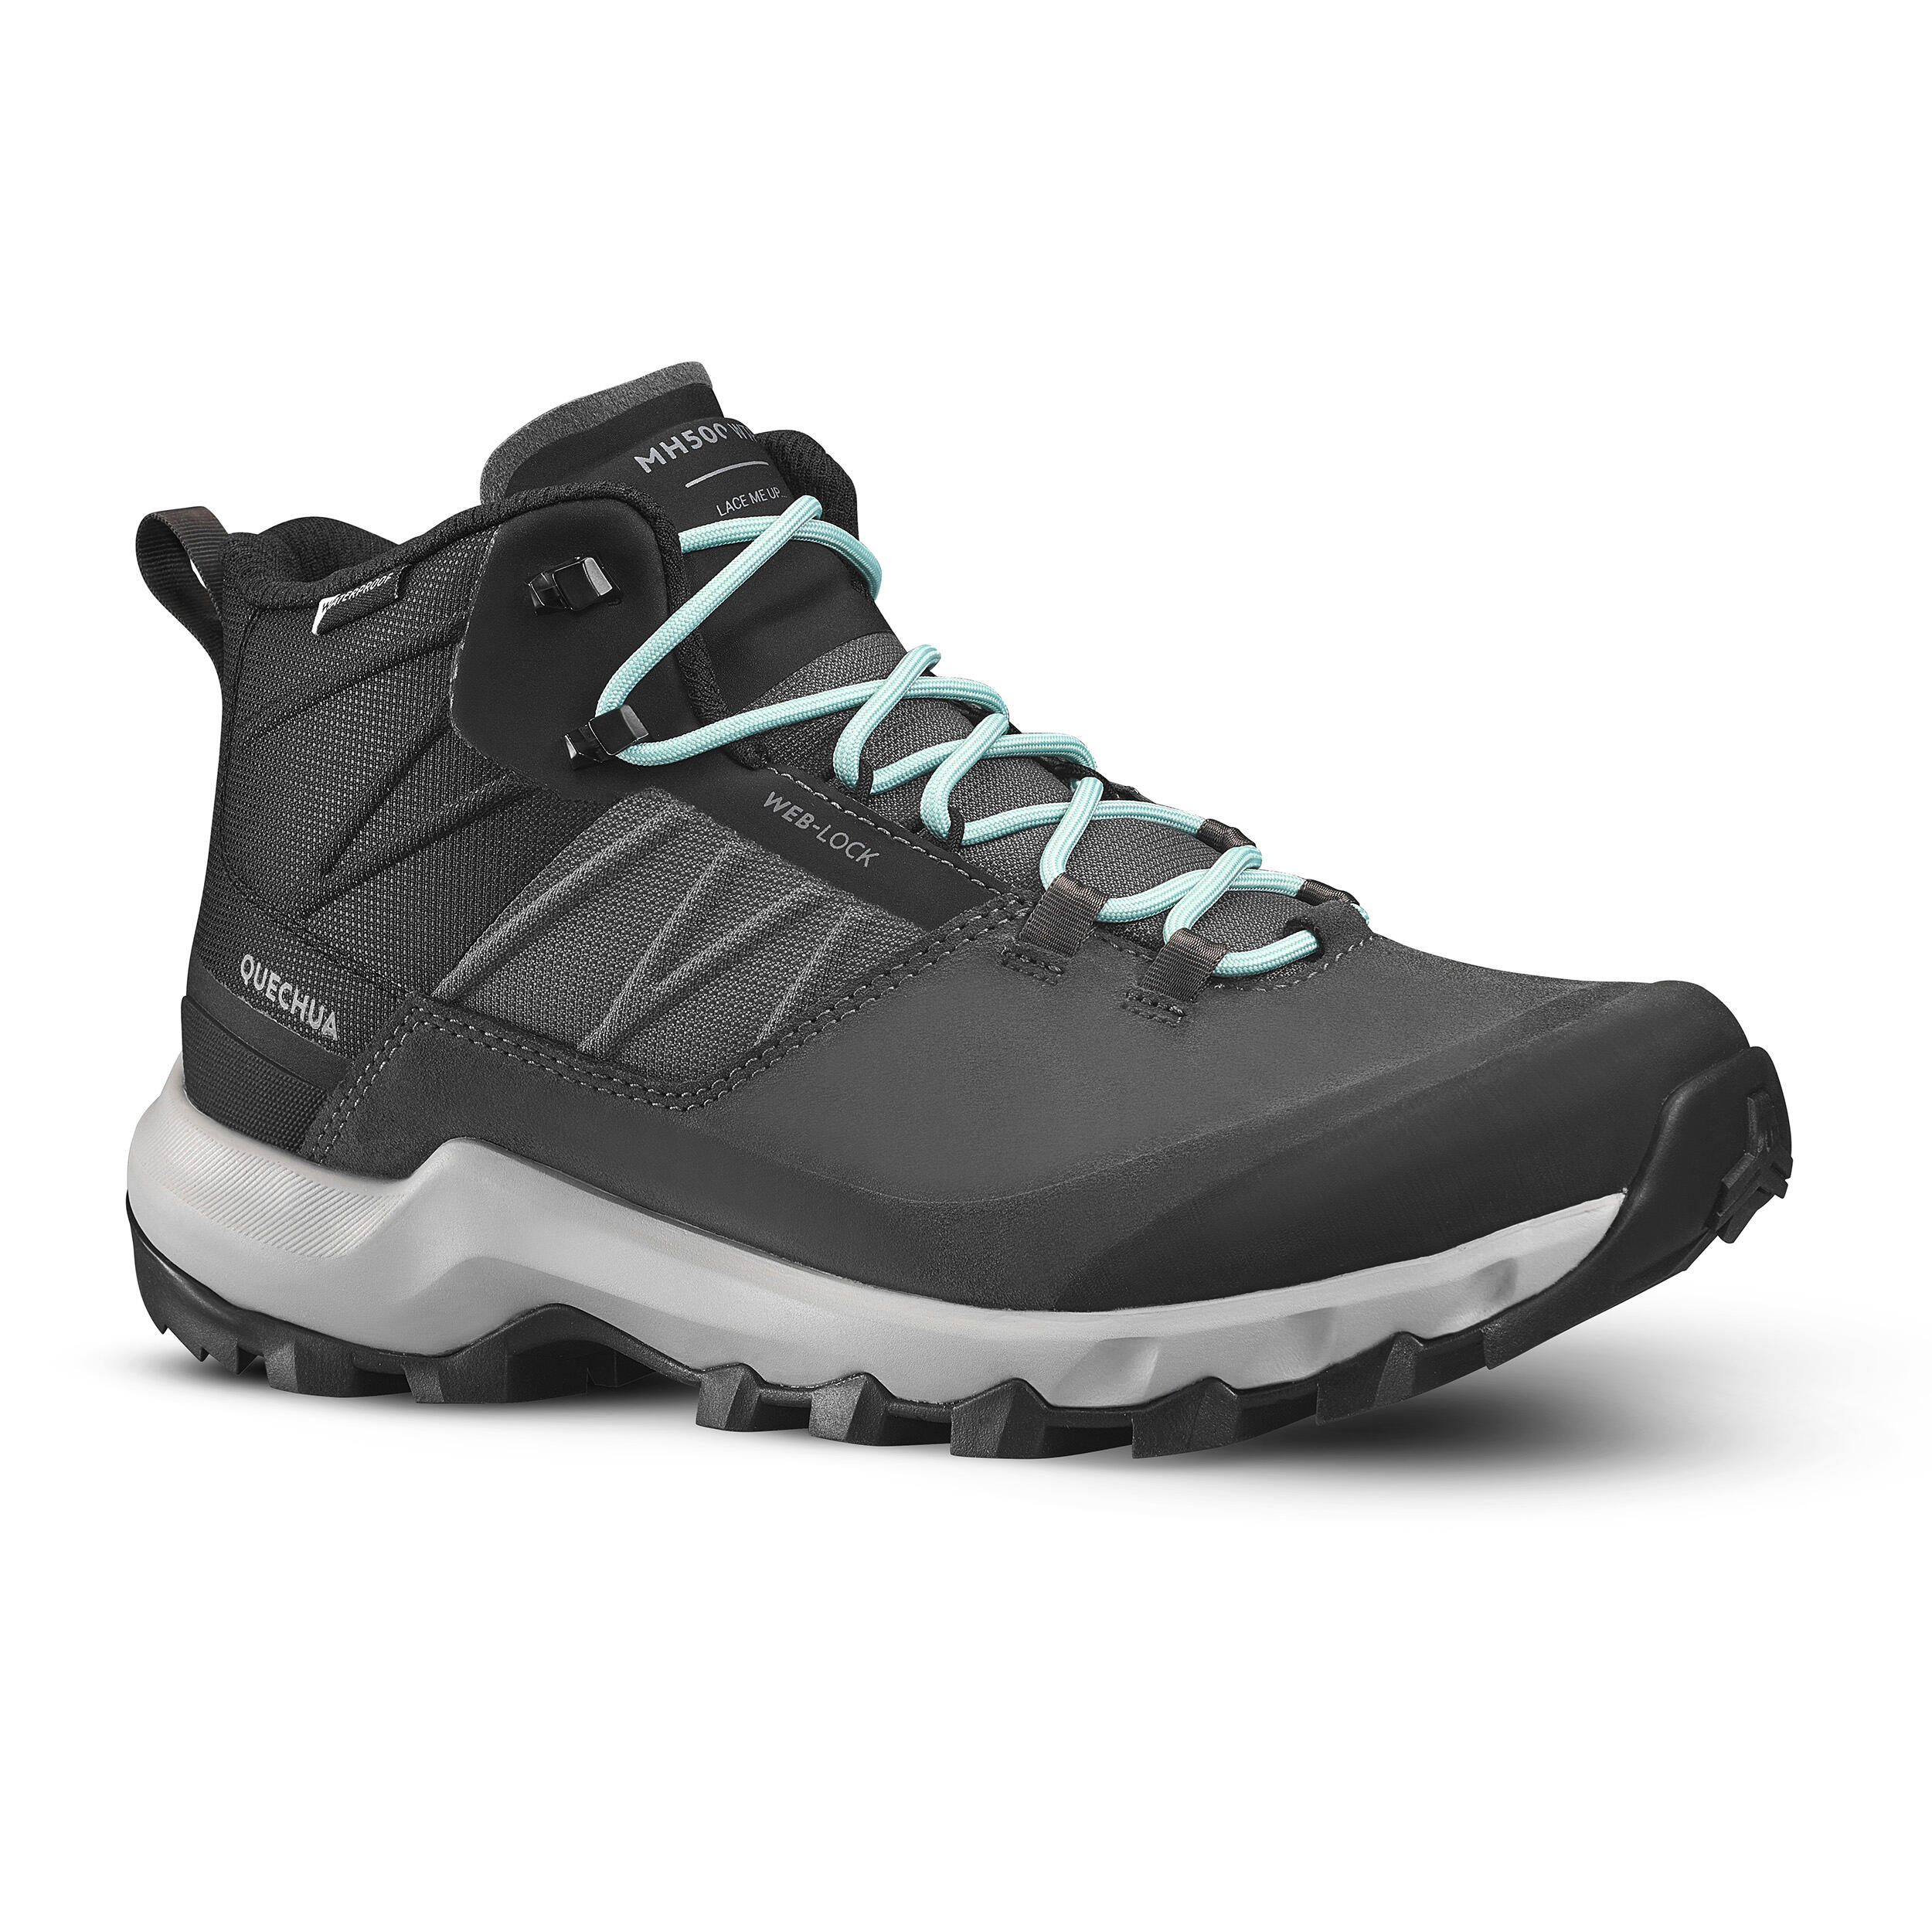 Women Waterproof Mountain Hiking Mid Shoes MH500 - Carbon Grey